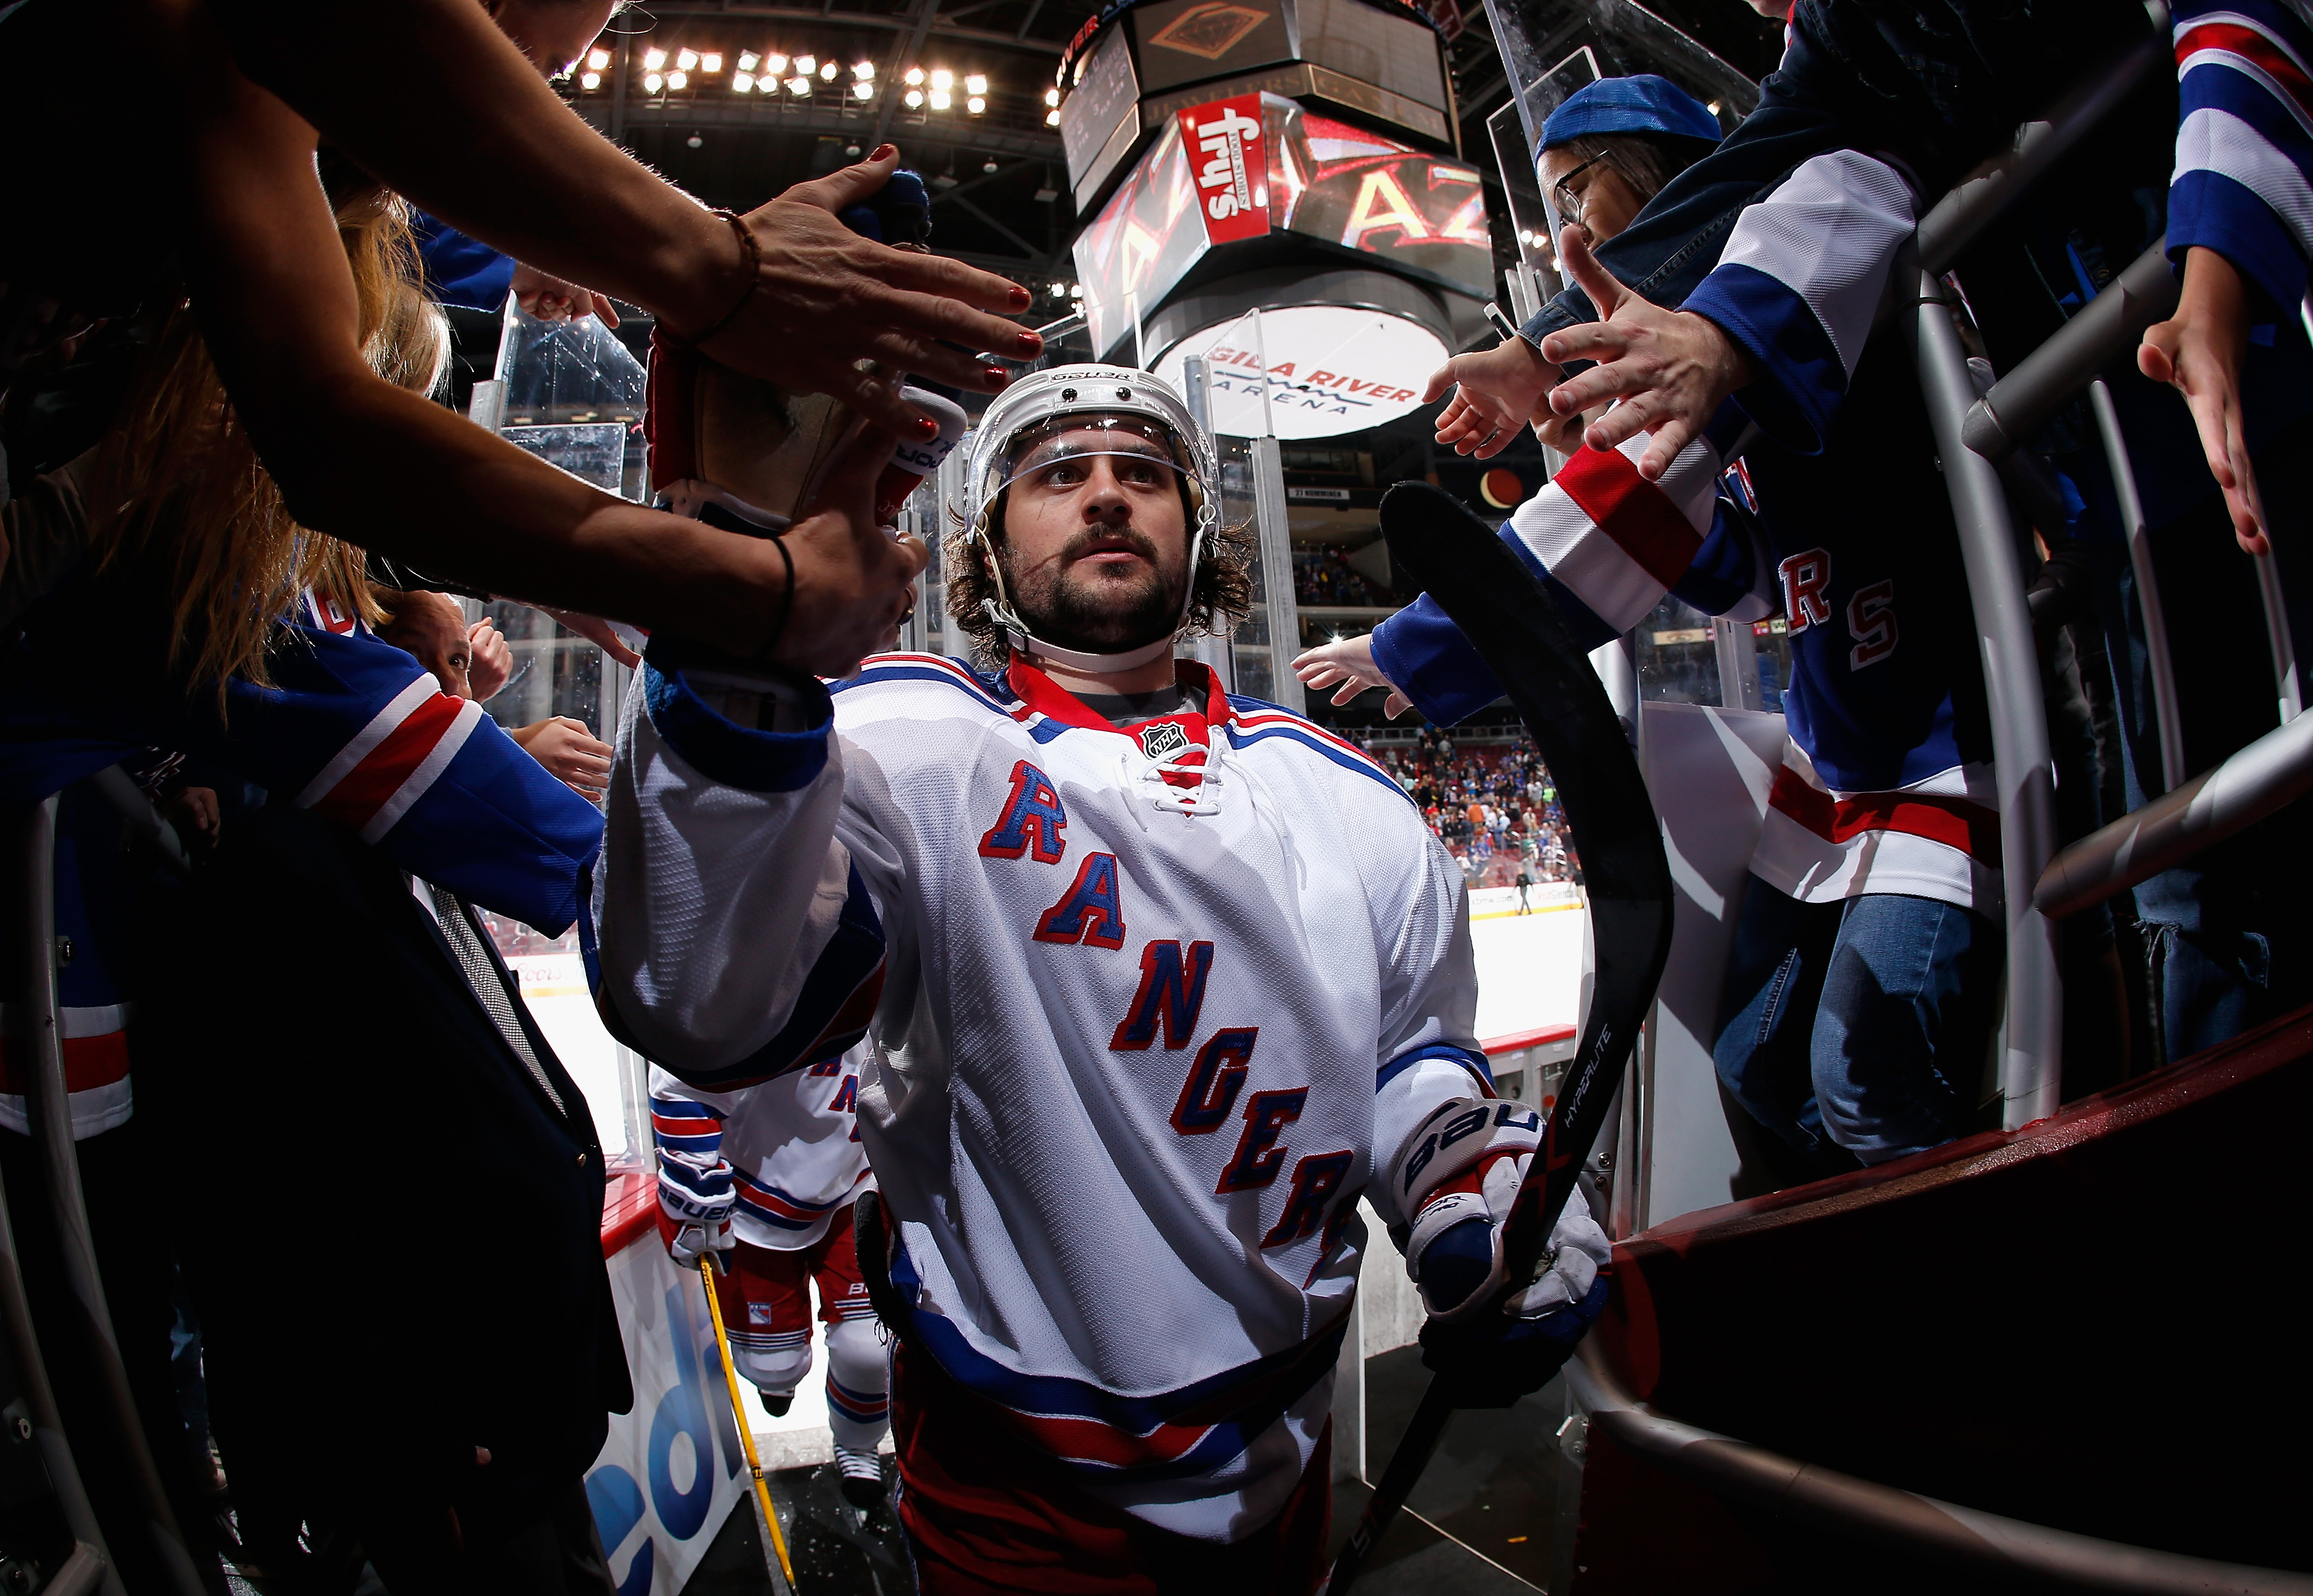 How We Play Hockey In Norway | By Mats Zuccarello